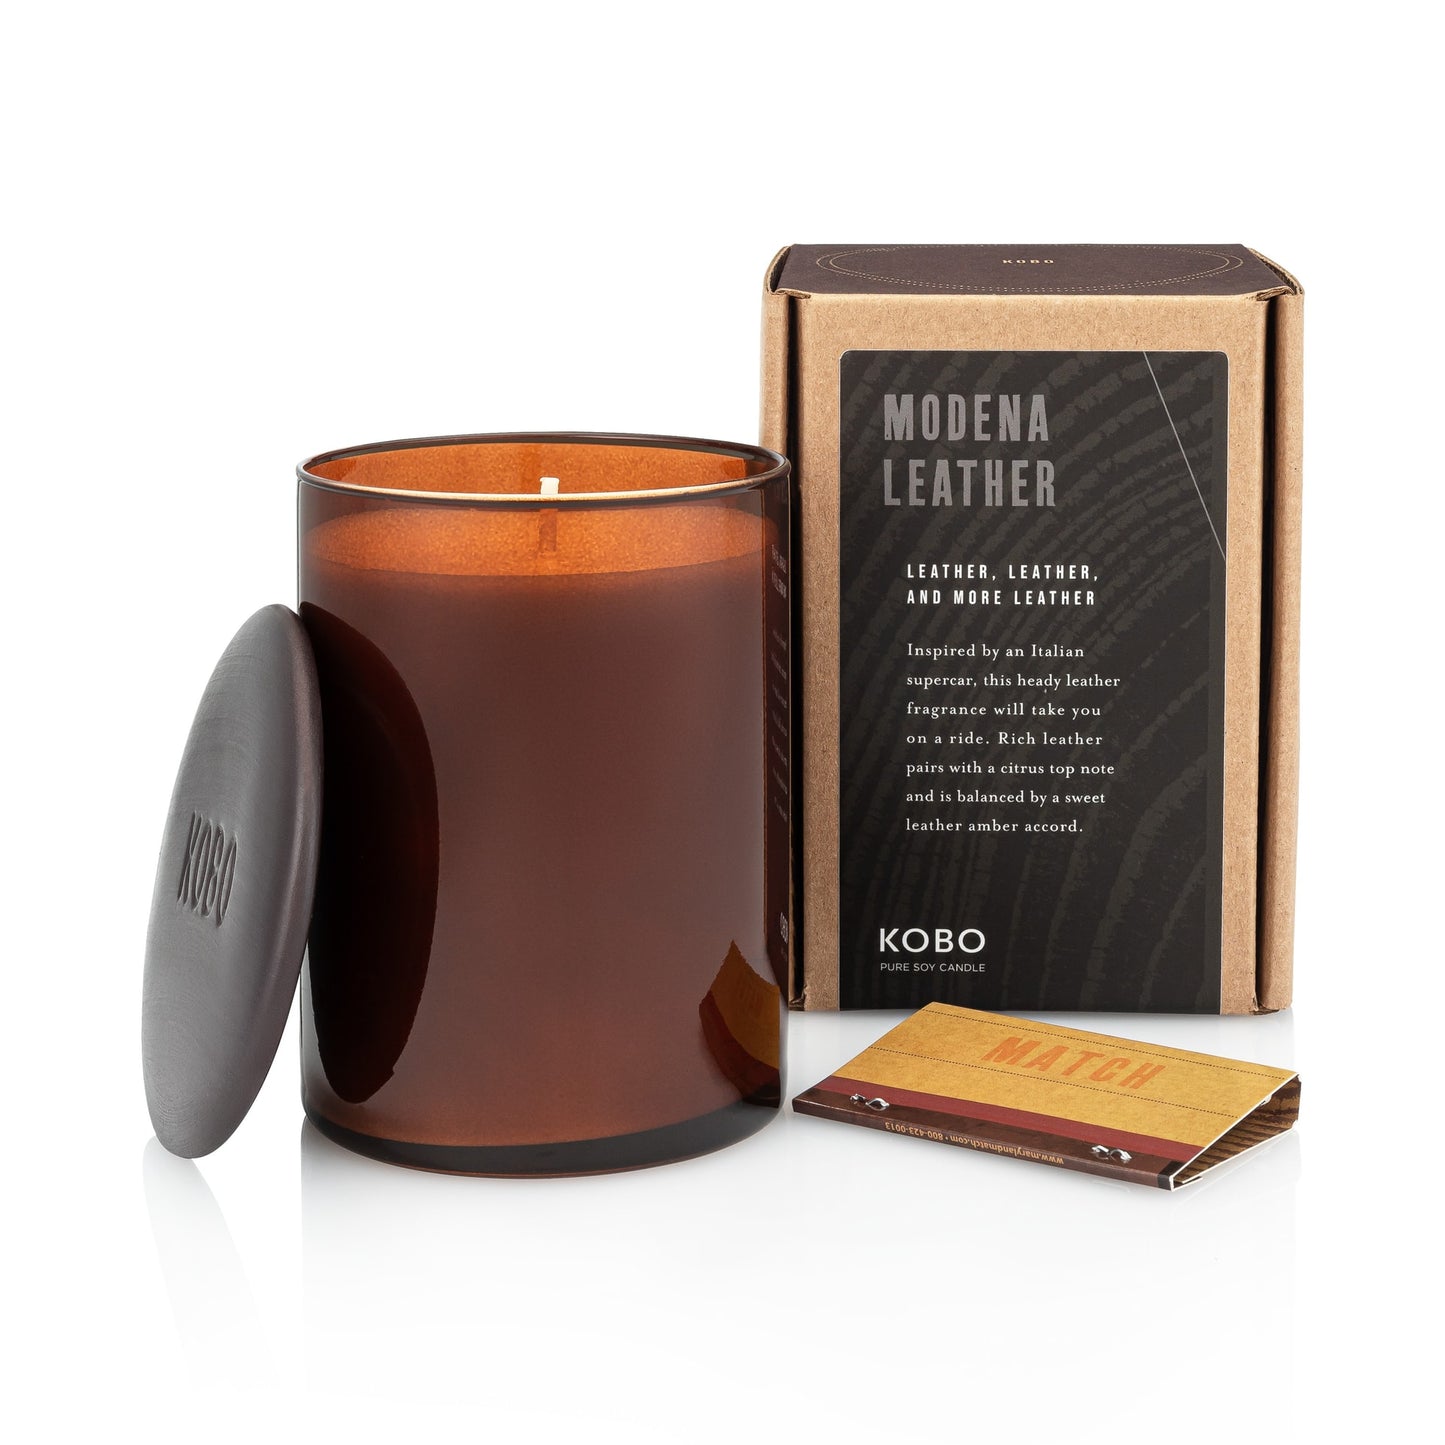 Primary Image of Modena Leather Woodblock 15 oz Candle